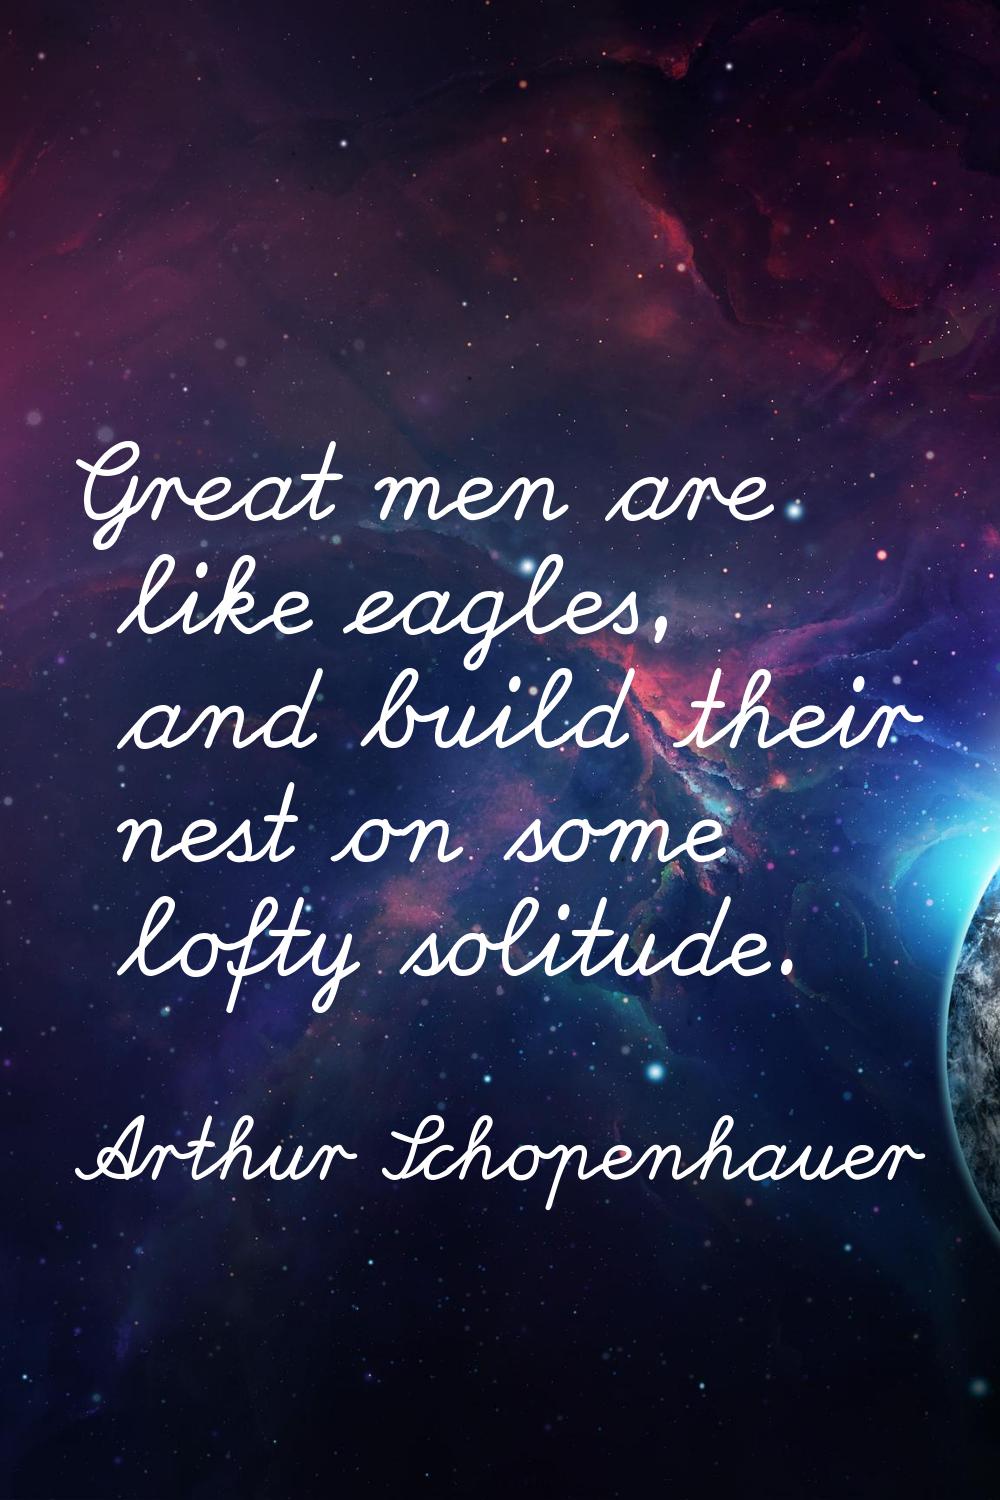 Great men are like eagles, and build their nest on some lofty solitude.